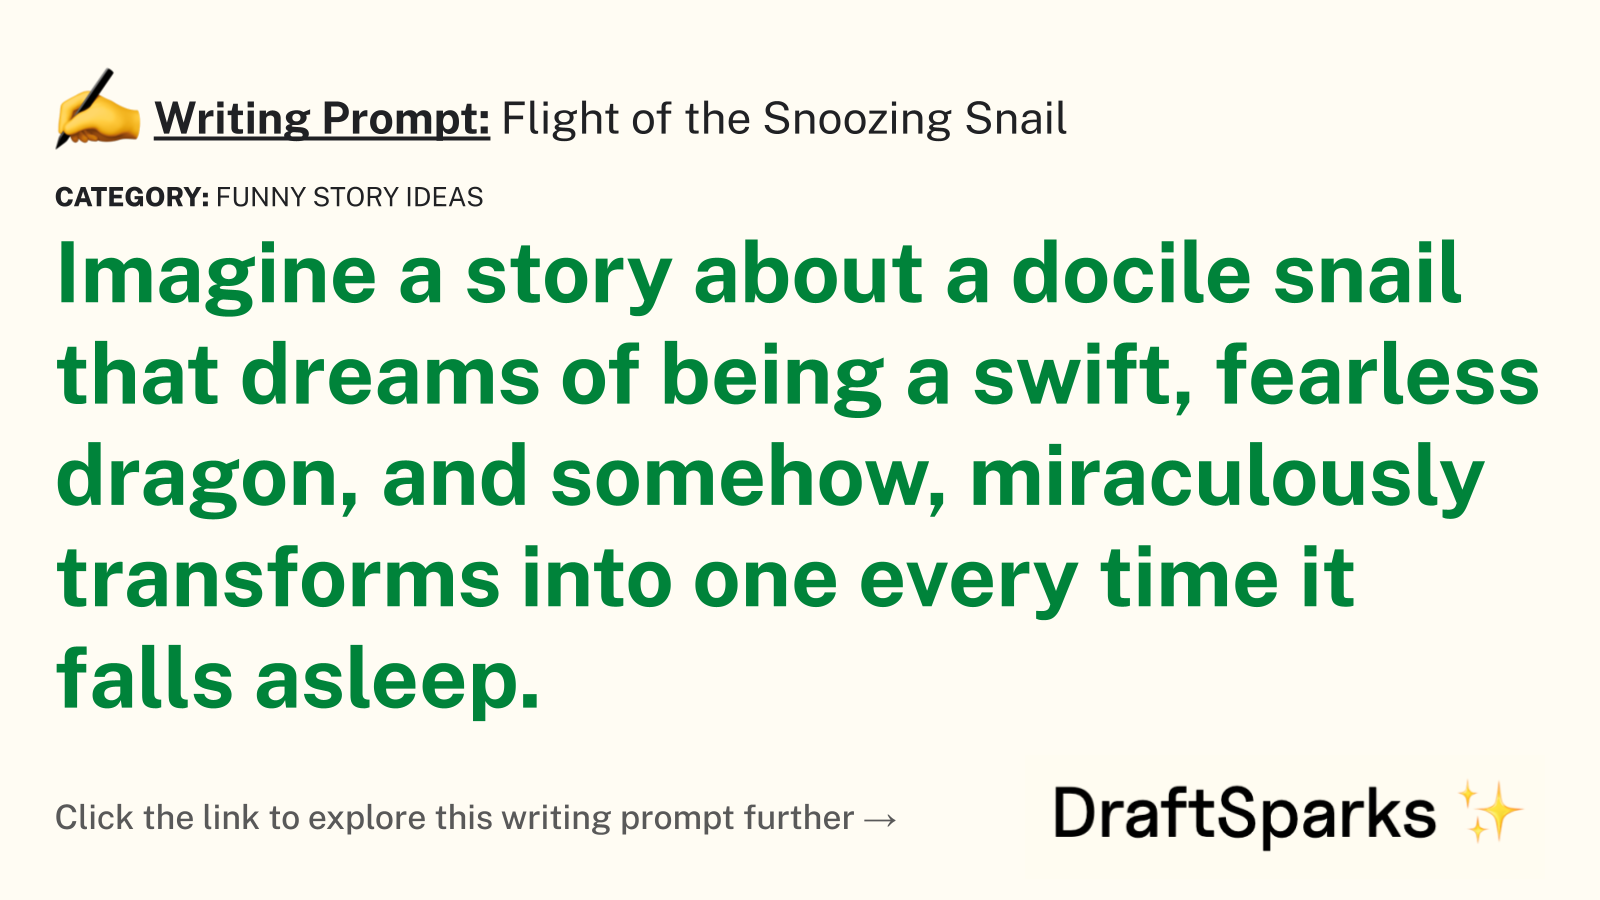 Flight of the Snoozing Snail